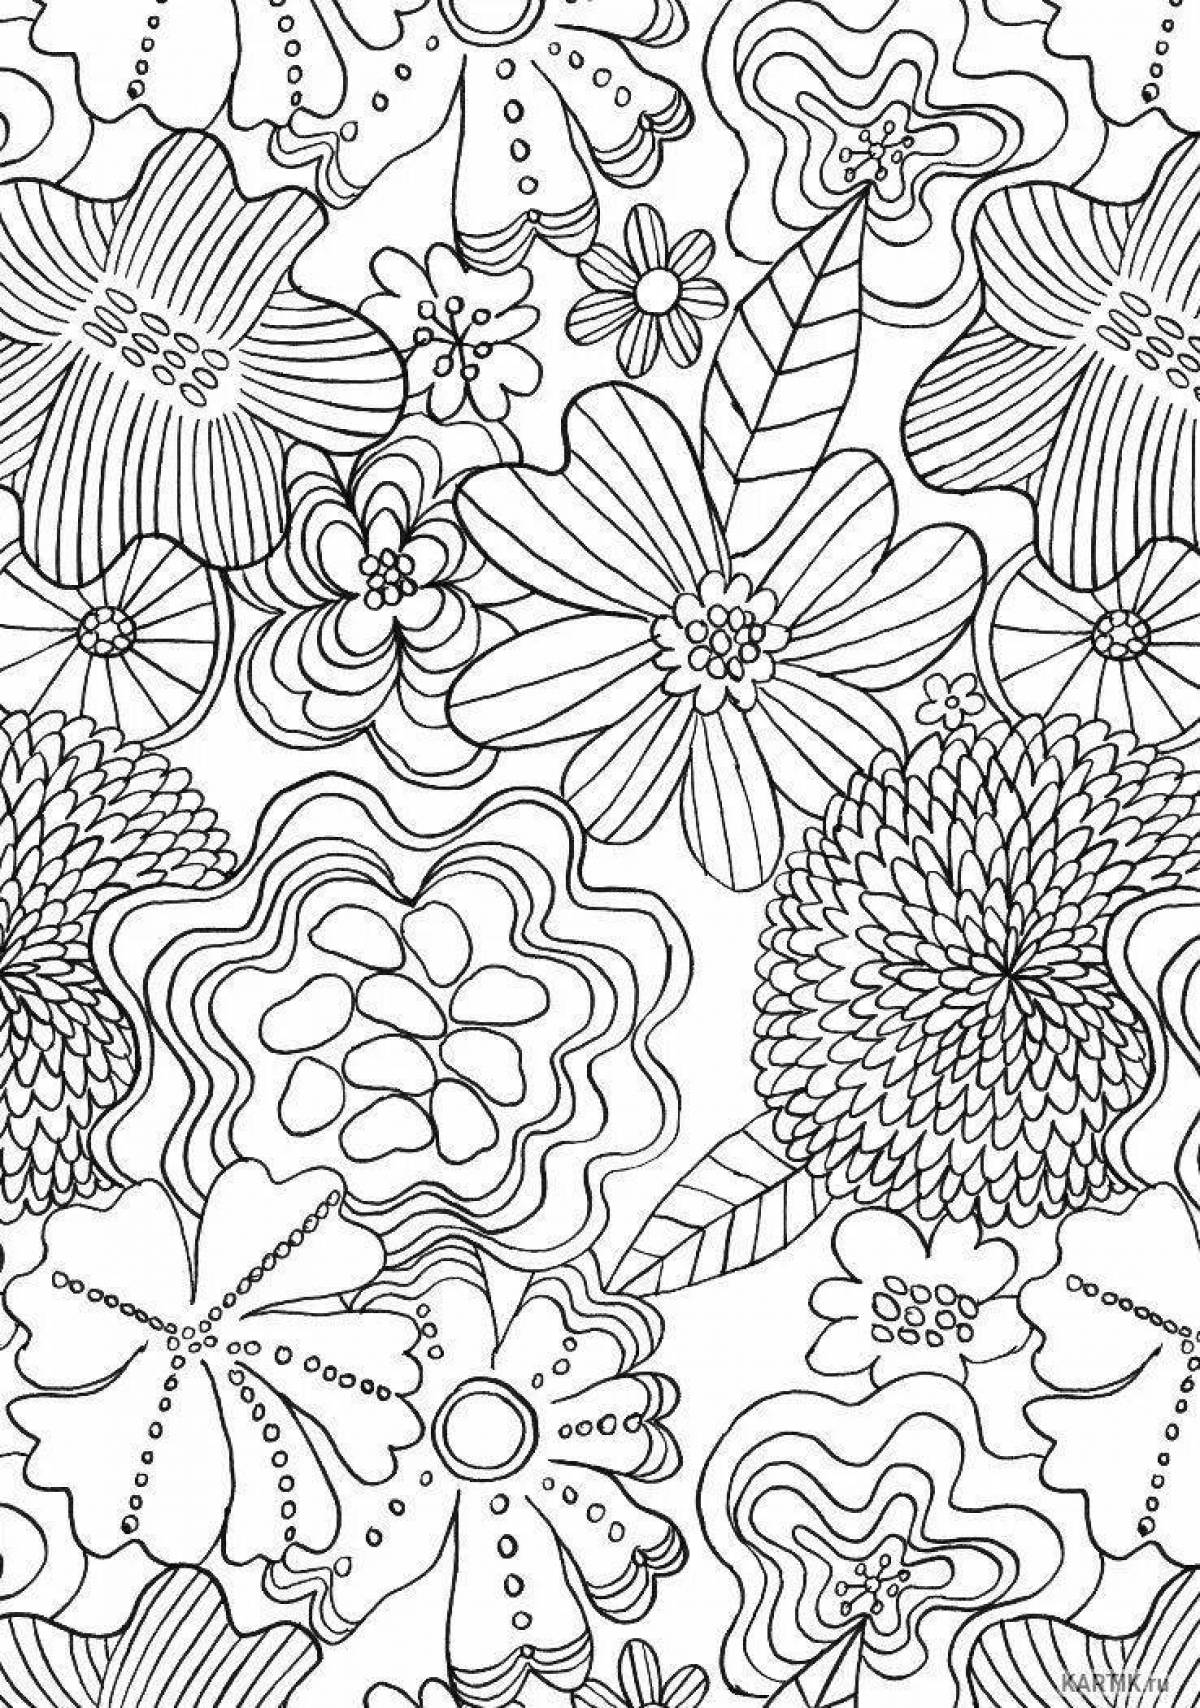 Soothing coloring color therapy